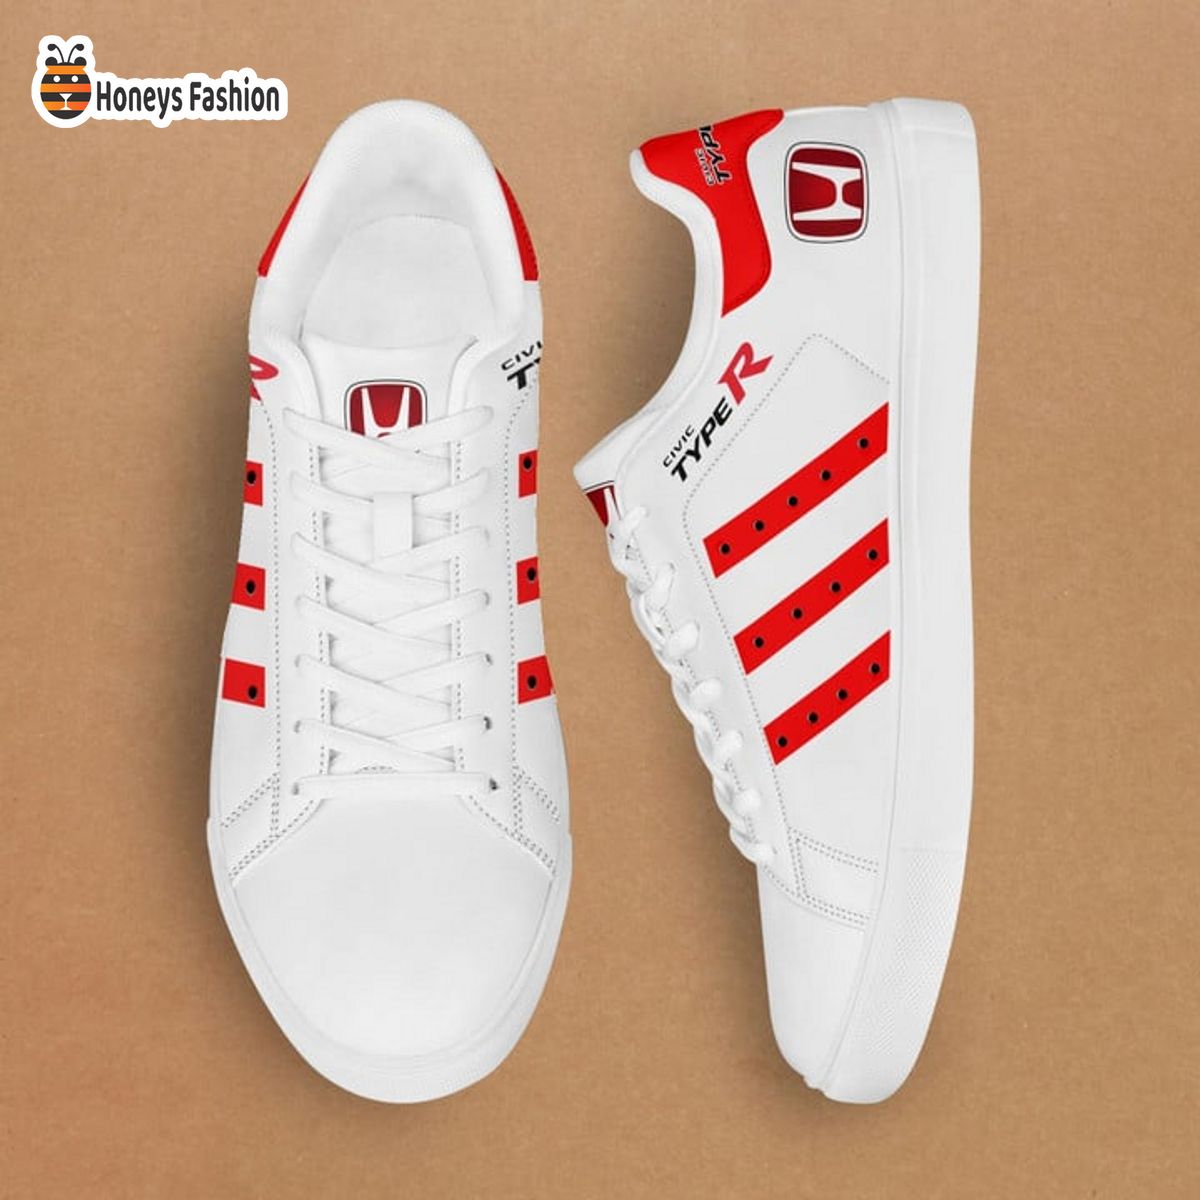 Honda Civic Type R Stan Smith Low Top Shoes